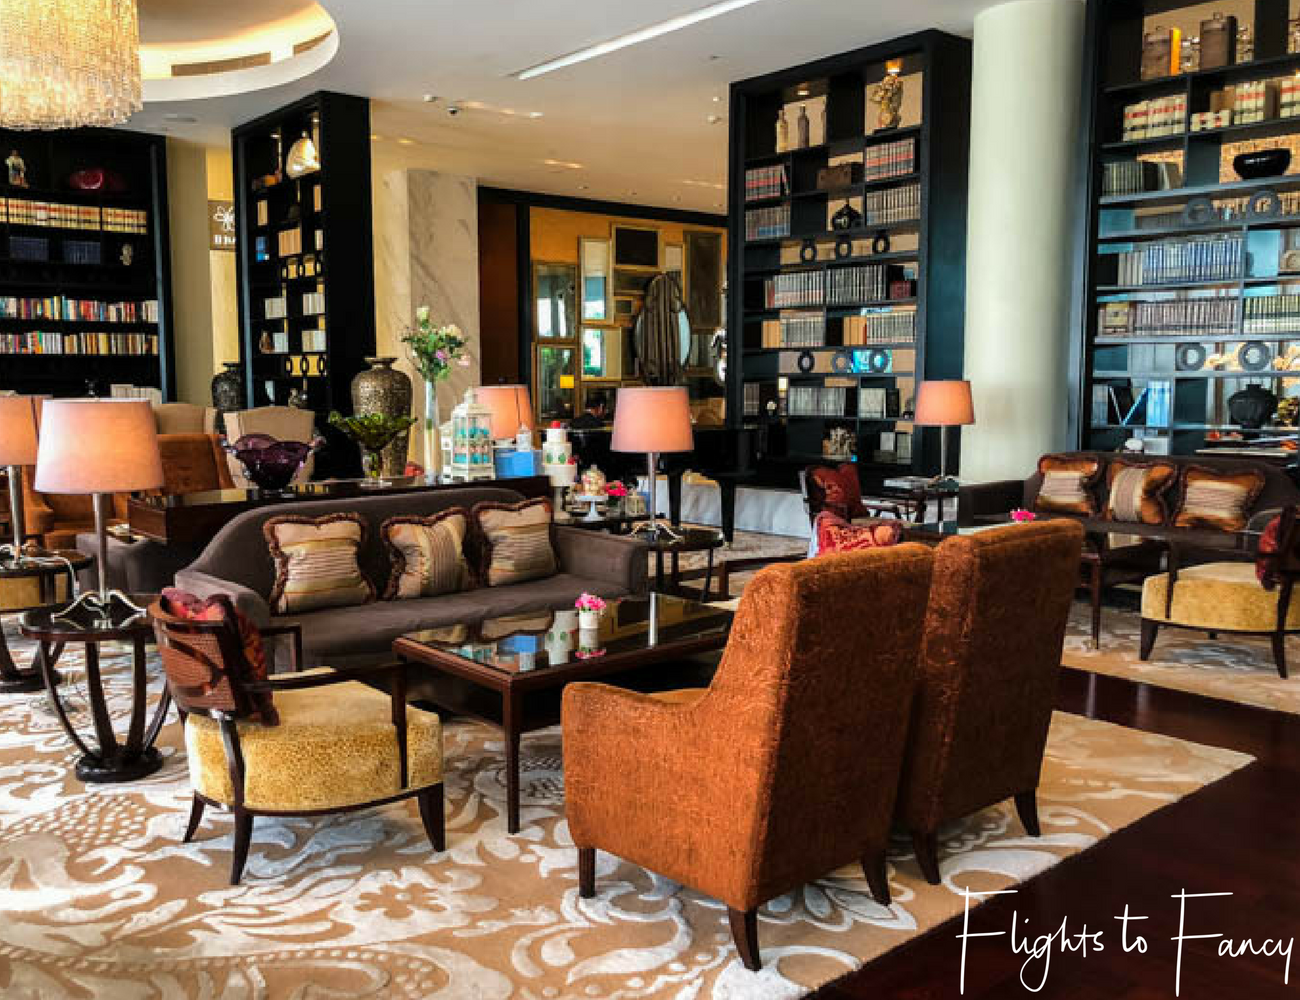 Flights To Fancy at Raffles Manila - The Writers Bar in one of the best hotels in Makati